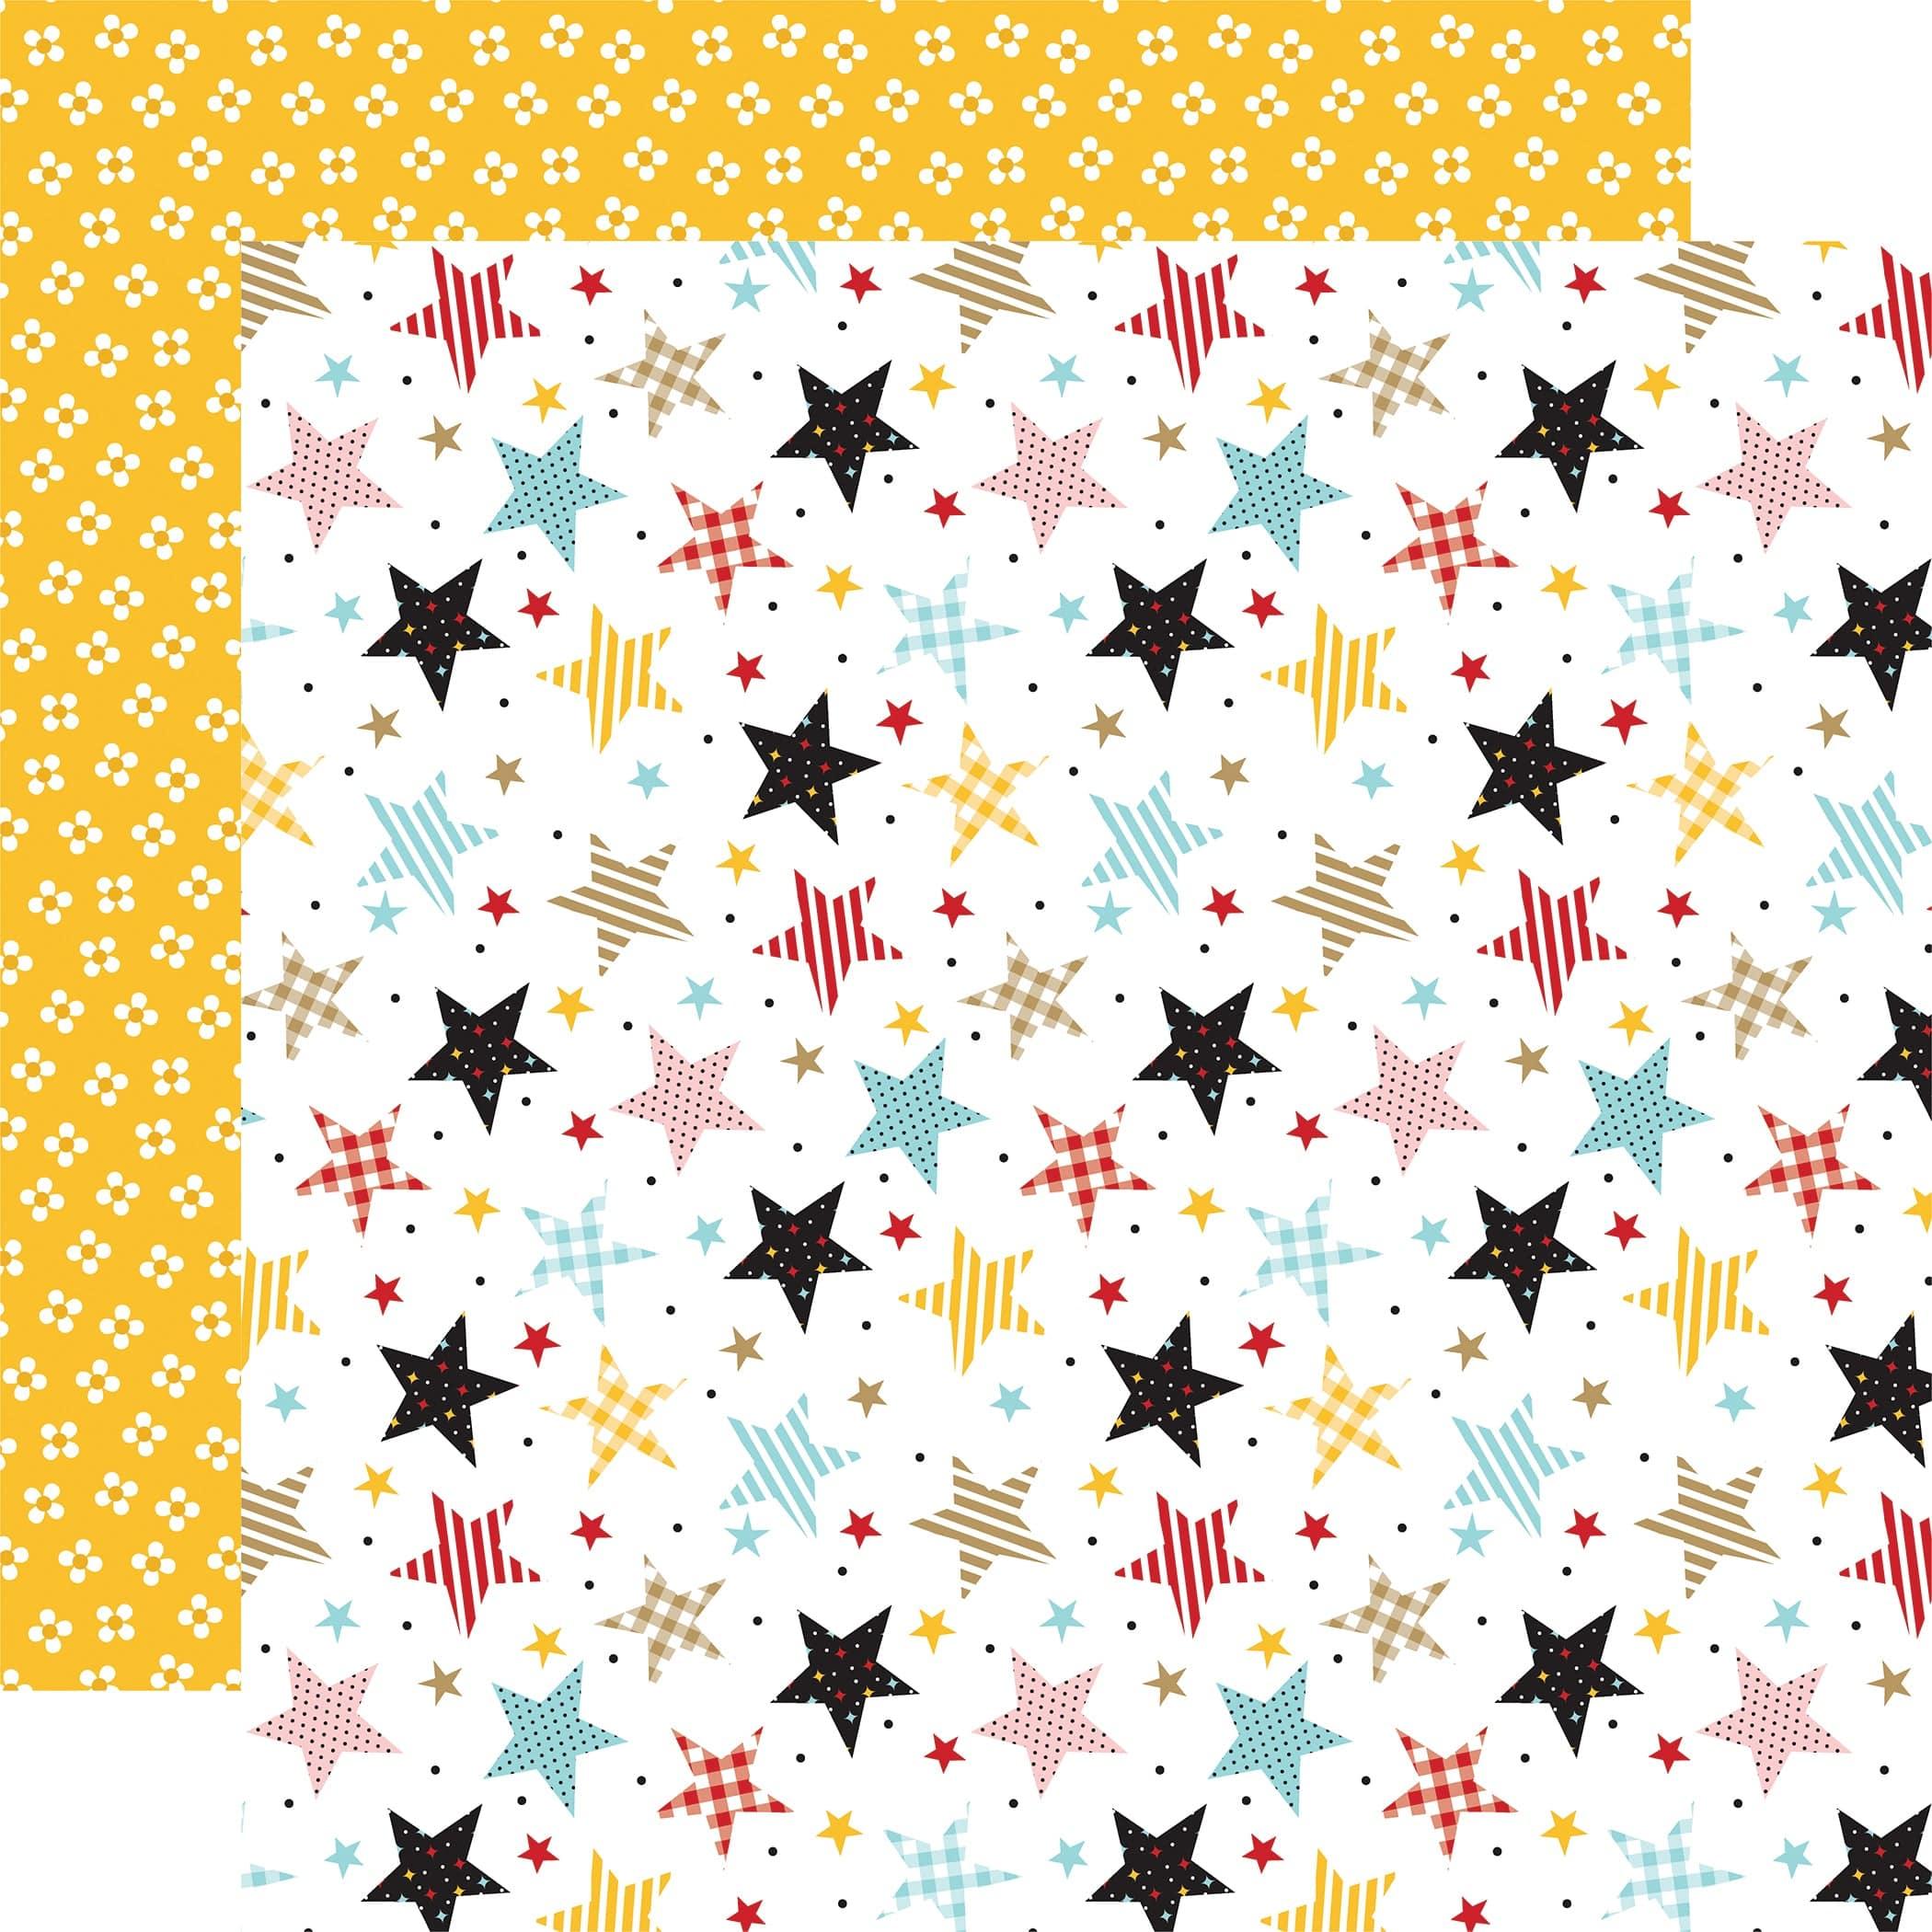 Wish Upon A Star 2 Collection Wish Upon The Stars 12 x 12 Double-Sided Scrapbook Paper by Echo Park Paper